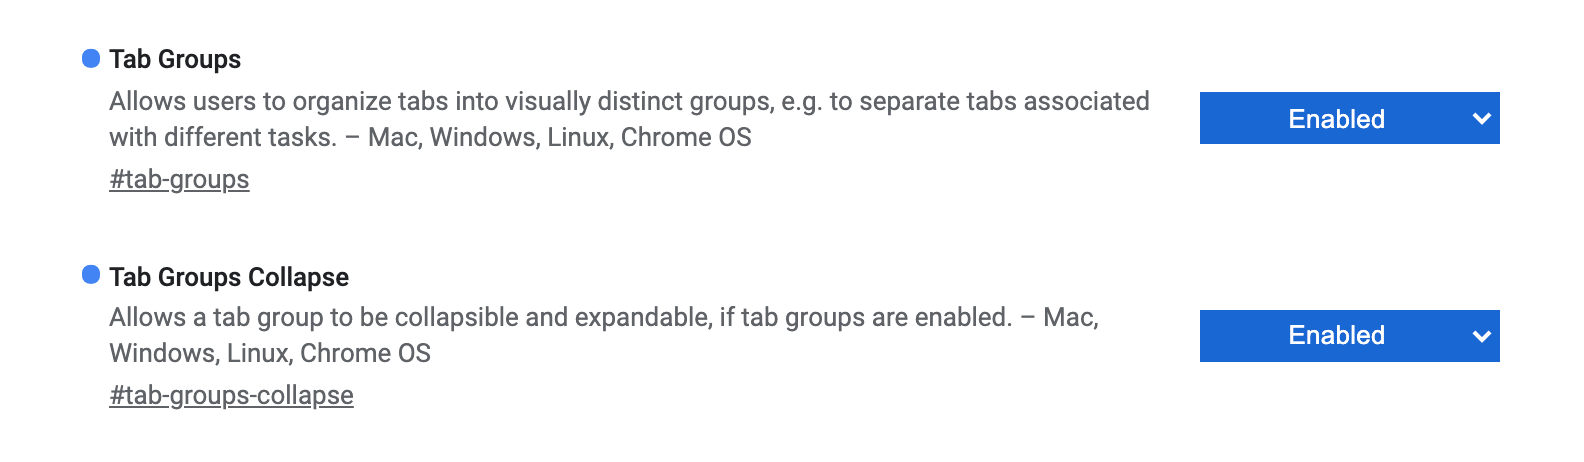 You may need to enable “Tab Groups” at chrome://flags